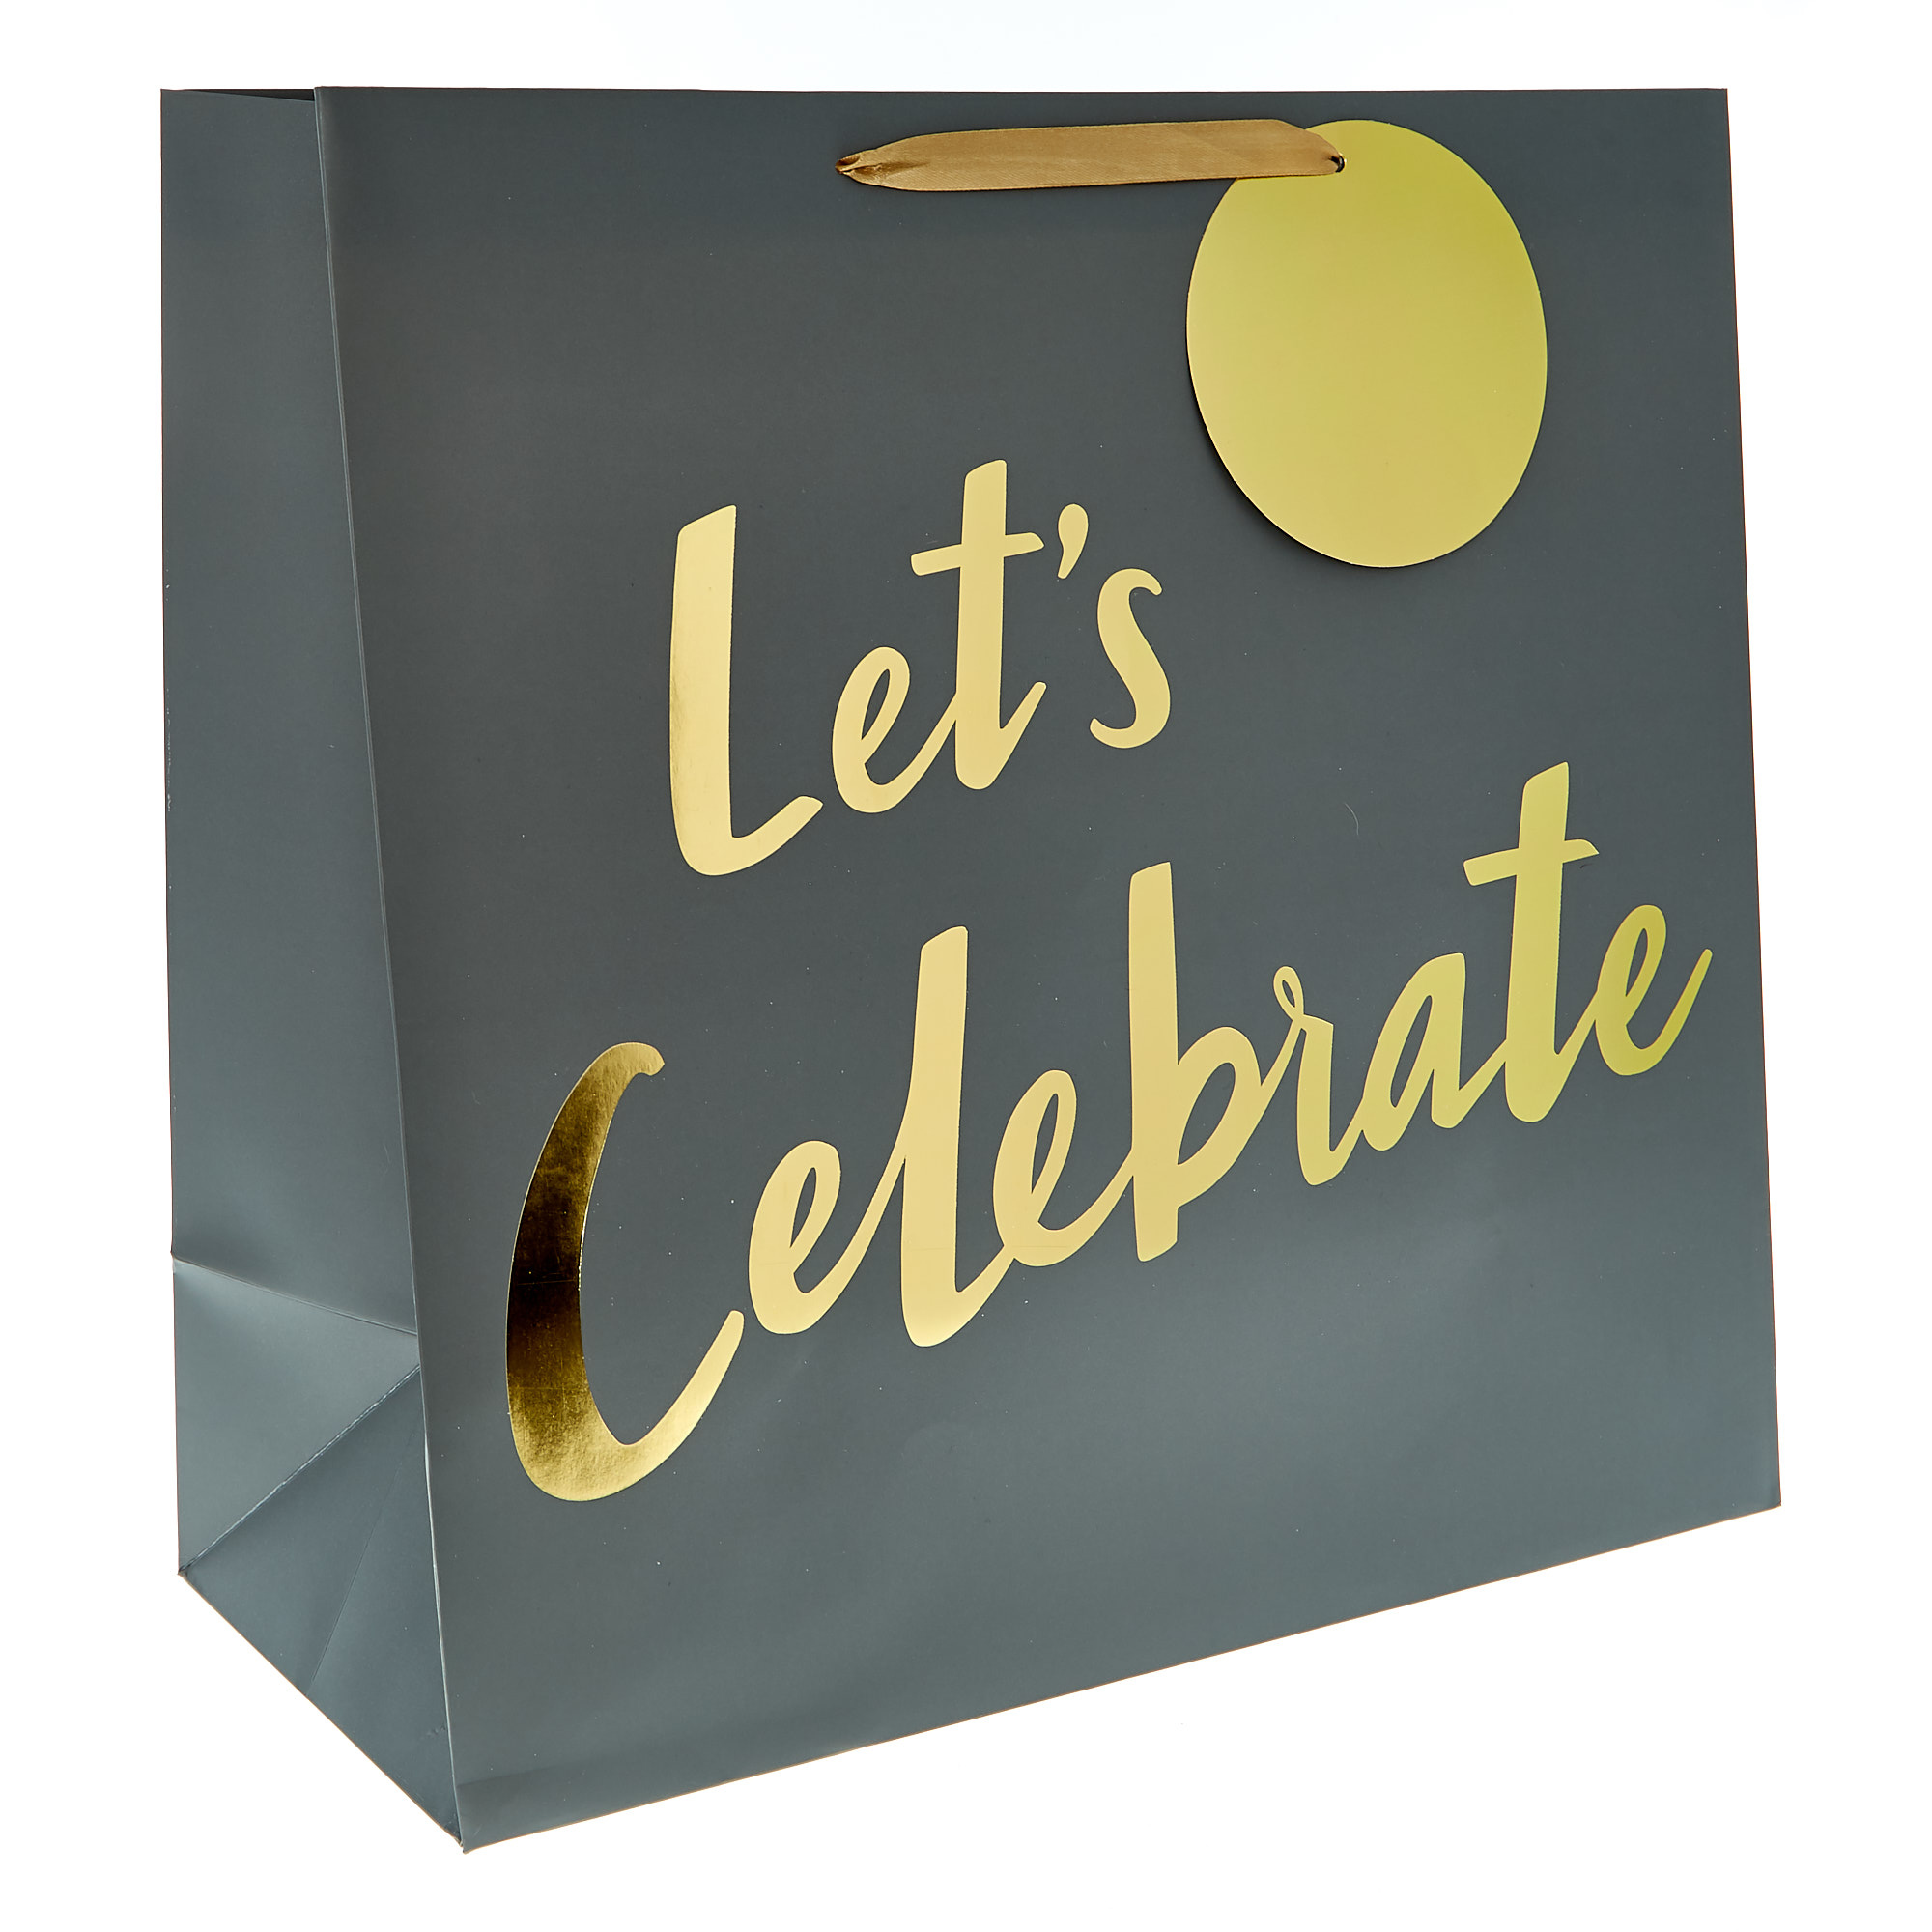 Extra Large Square Gift Bag - Let's Celebrate!